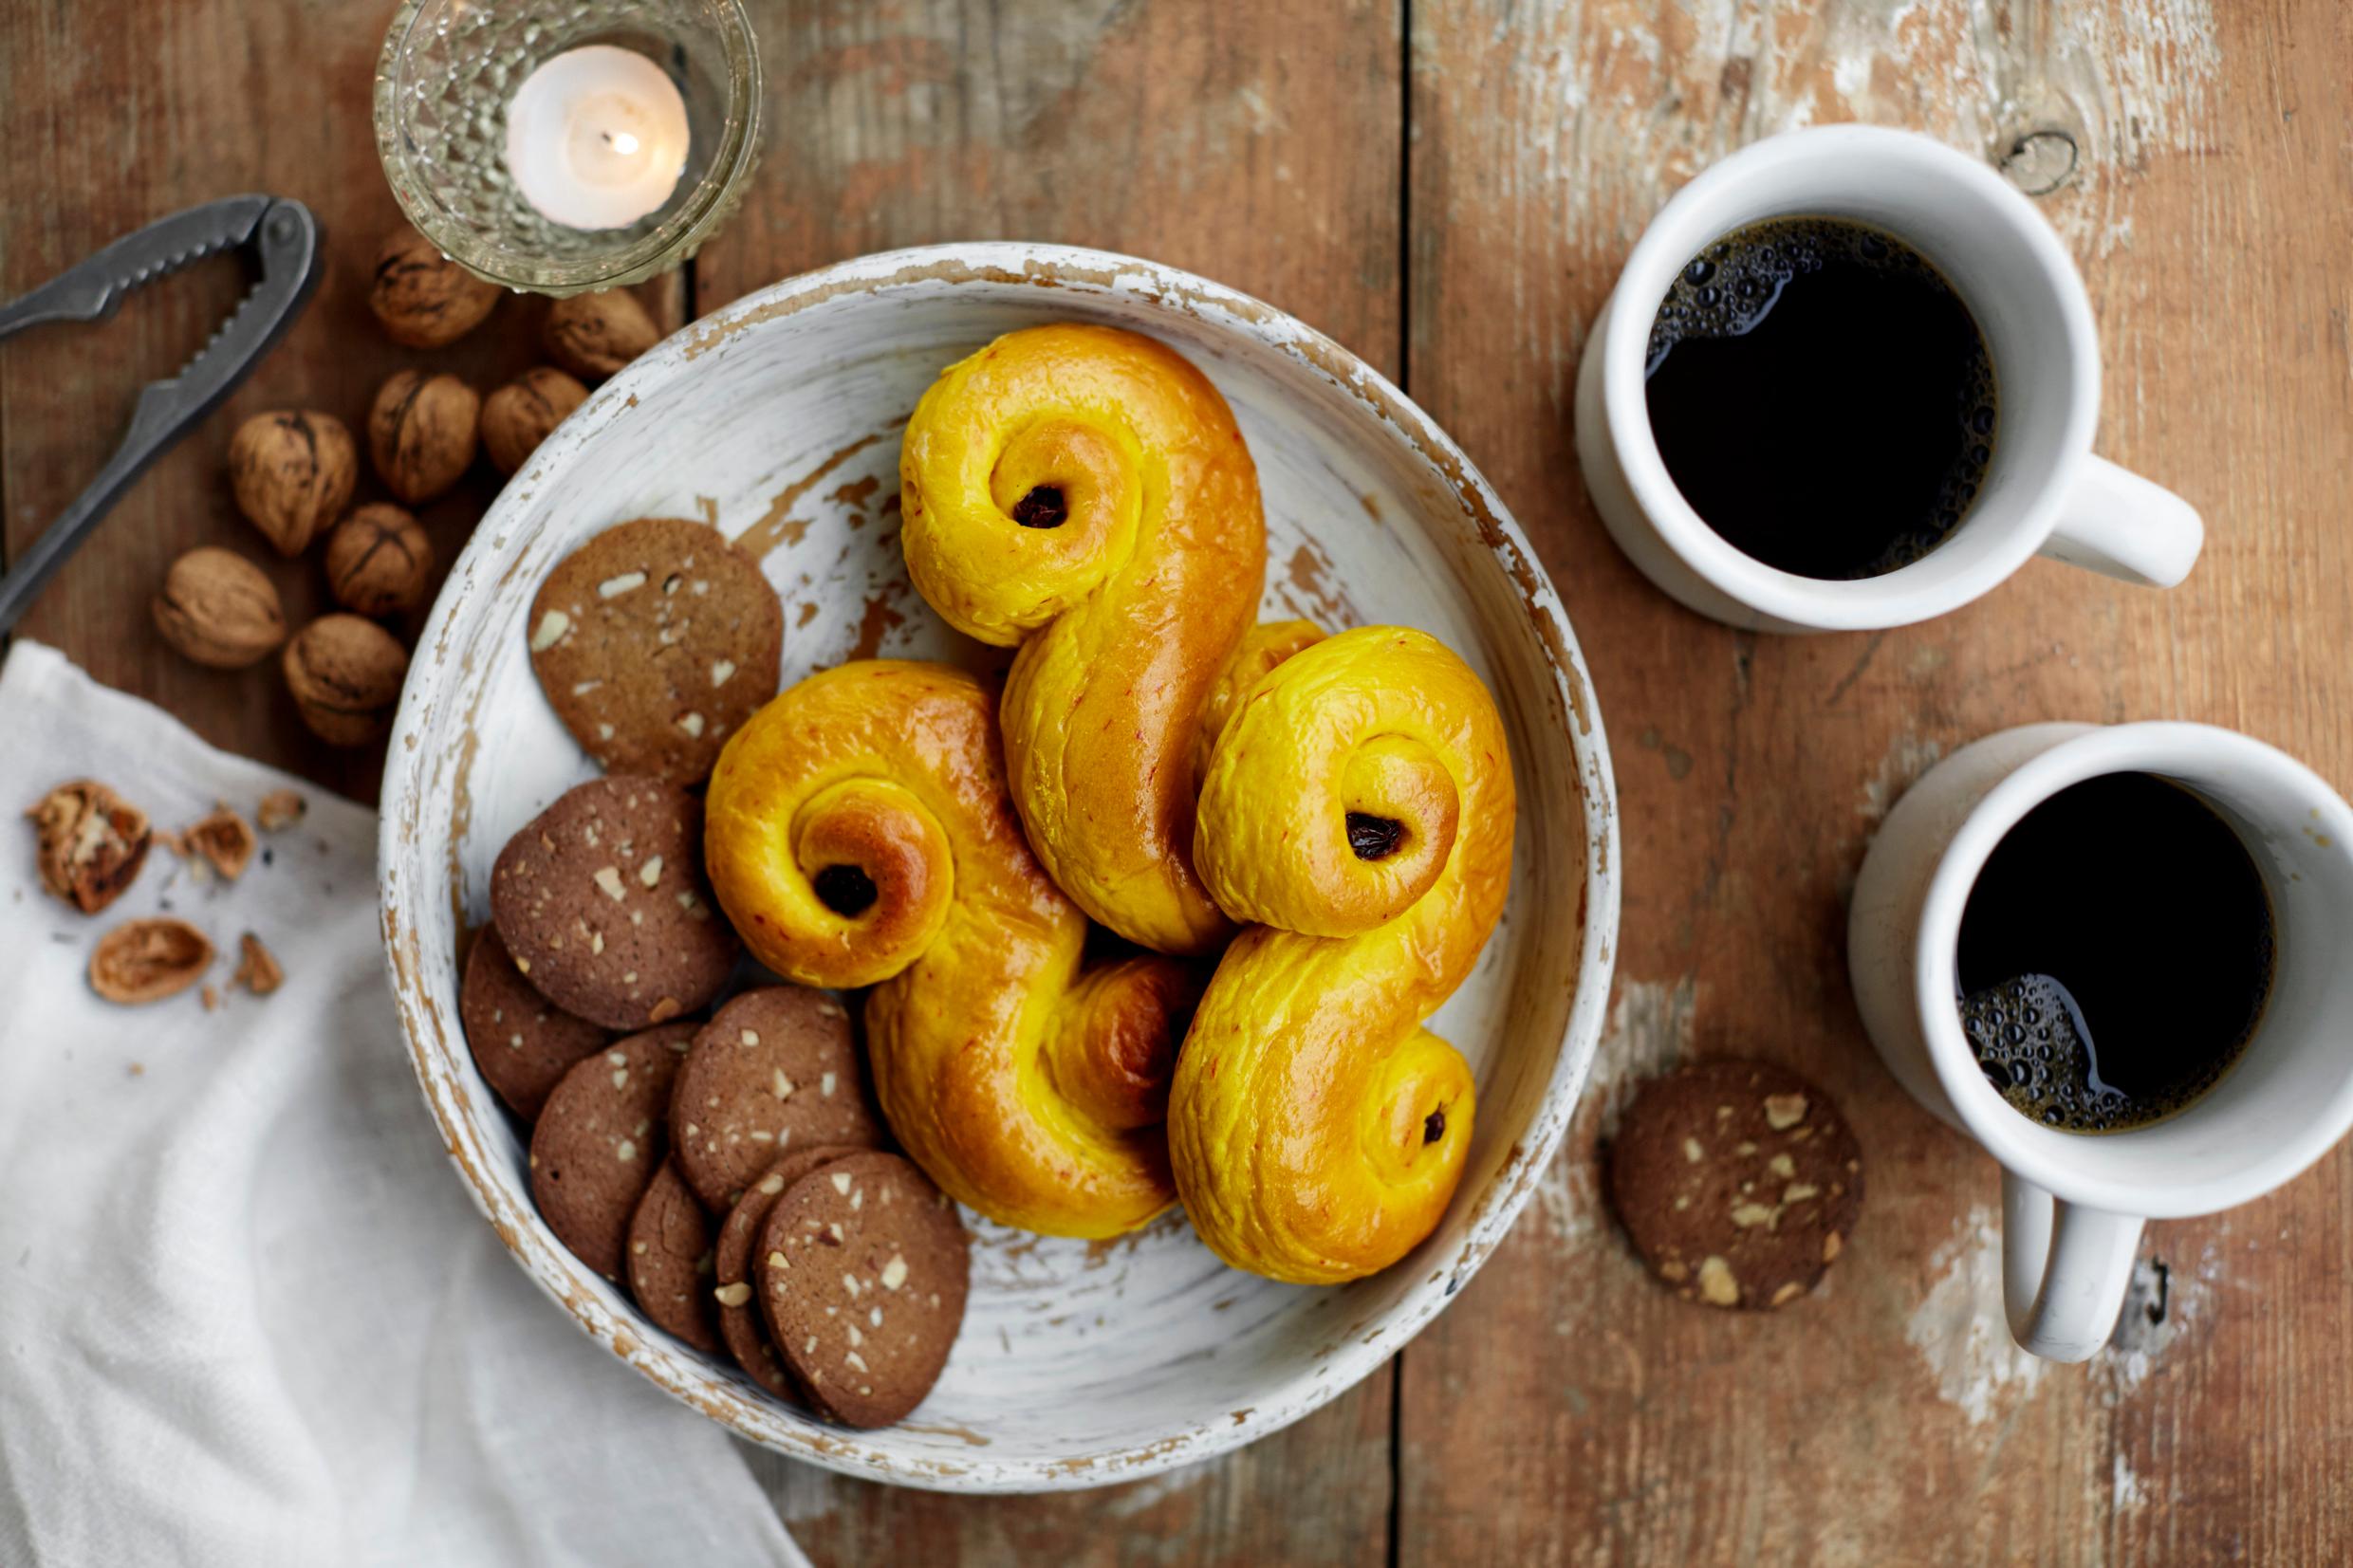 A rustic wooden table is set with a tray of typical Swedish Christmas treats such as lussebullar, nuts, and cups of mulled wine.